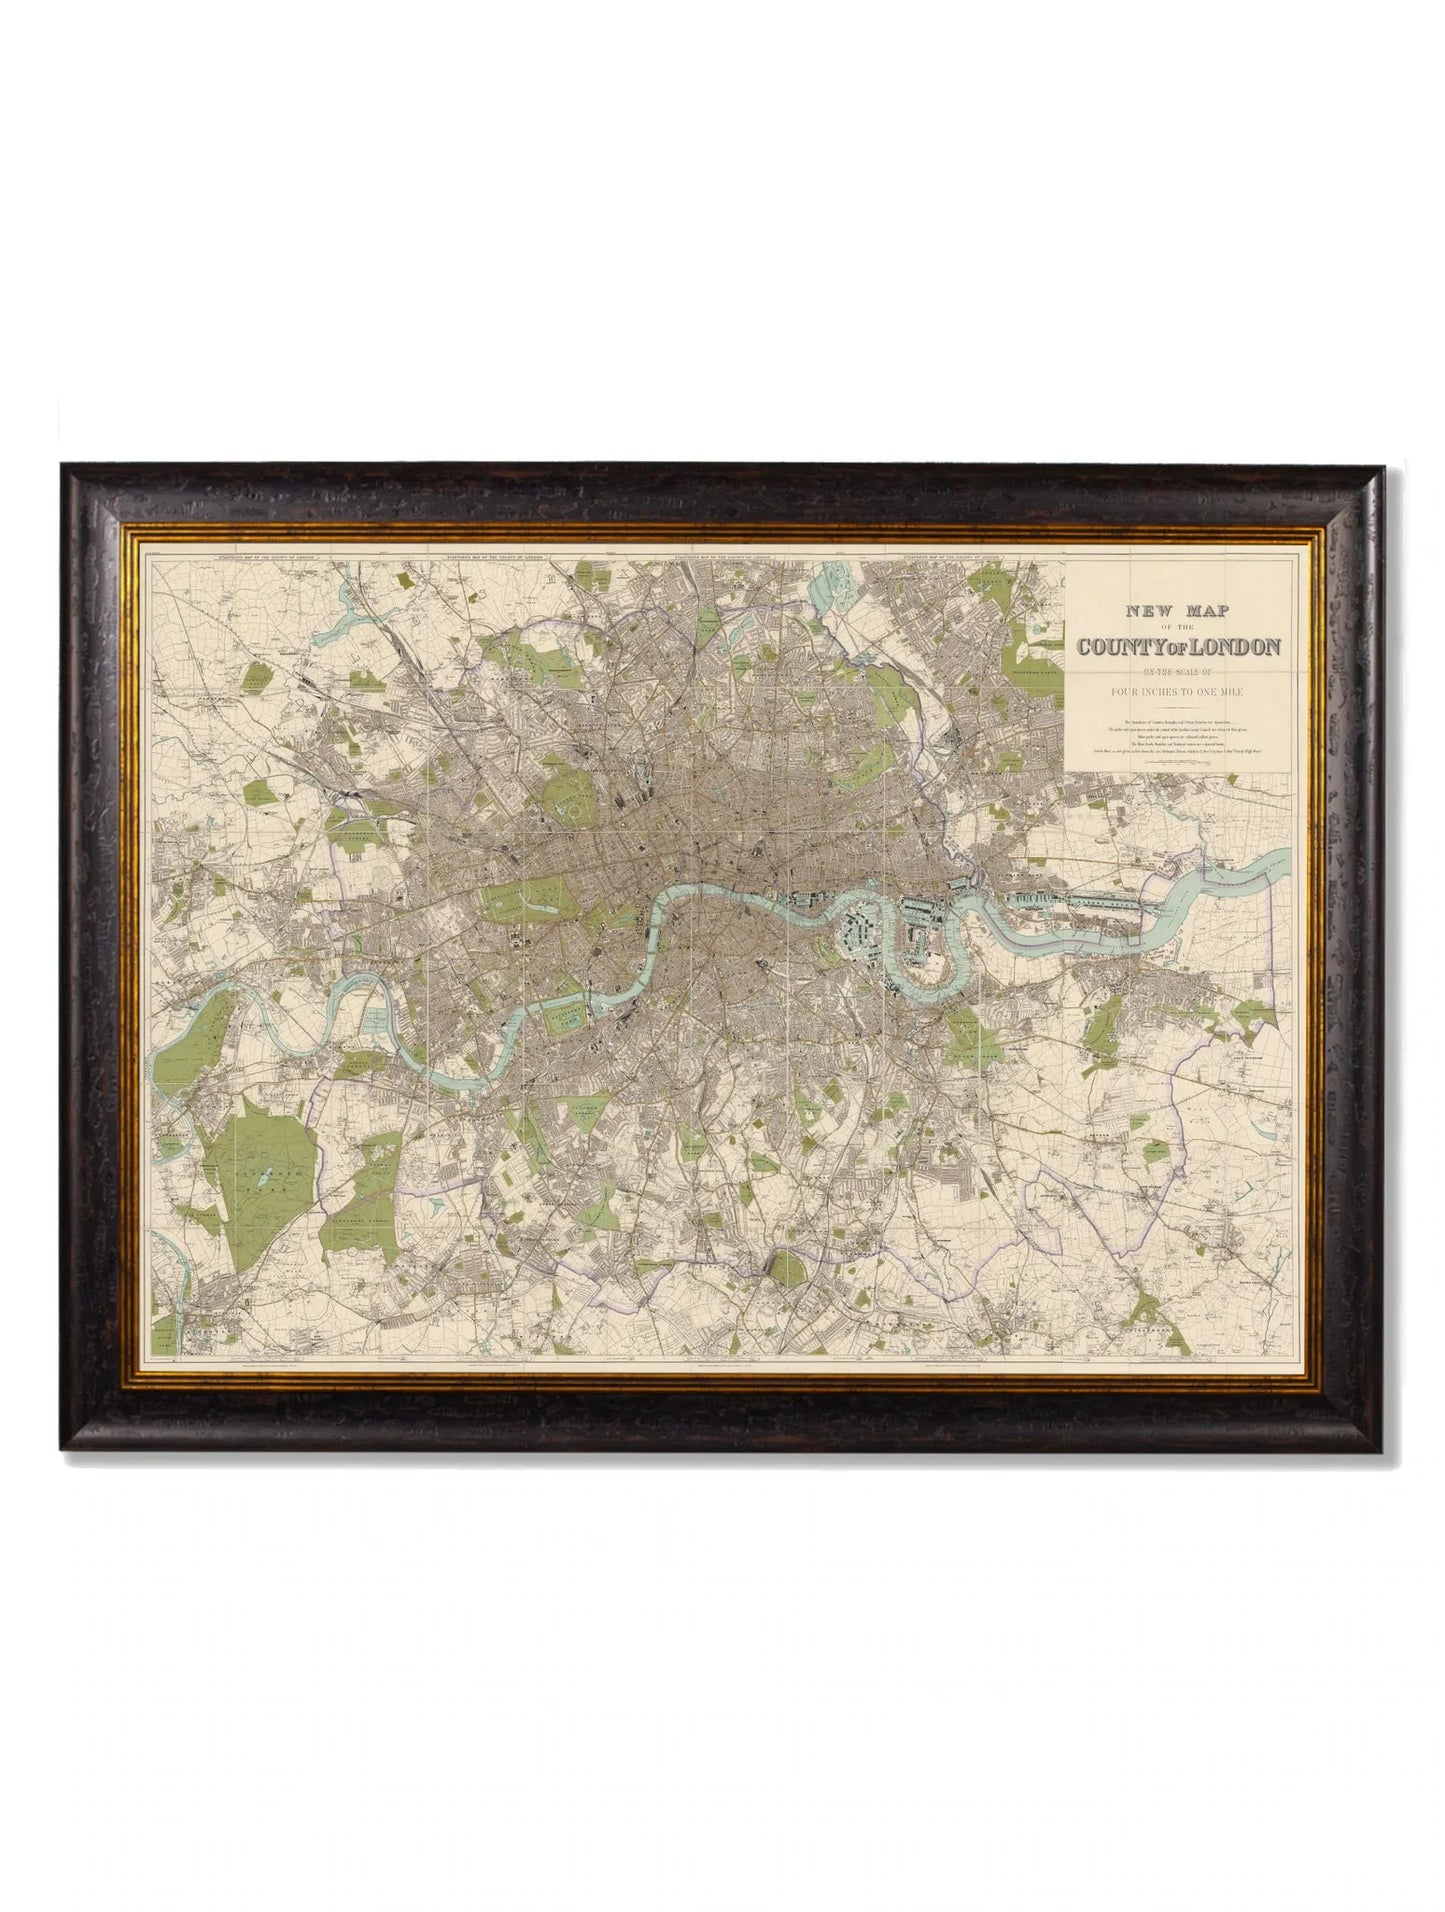 C.1905 County Map of London Frame for sale - Woodcock and Cavendish